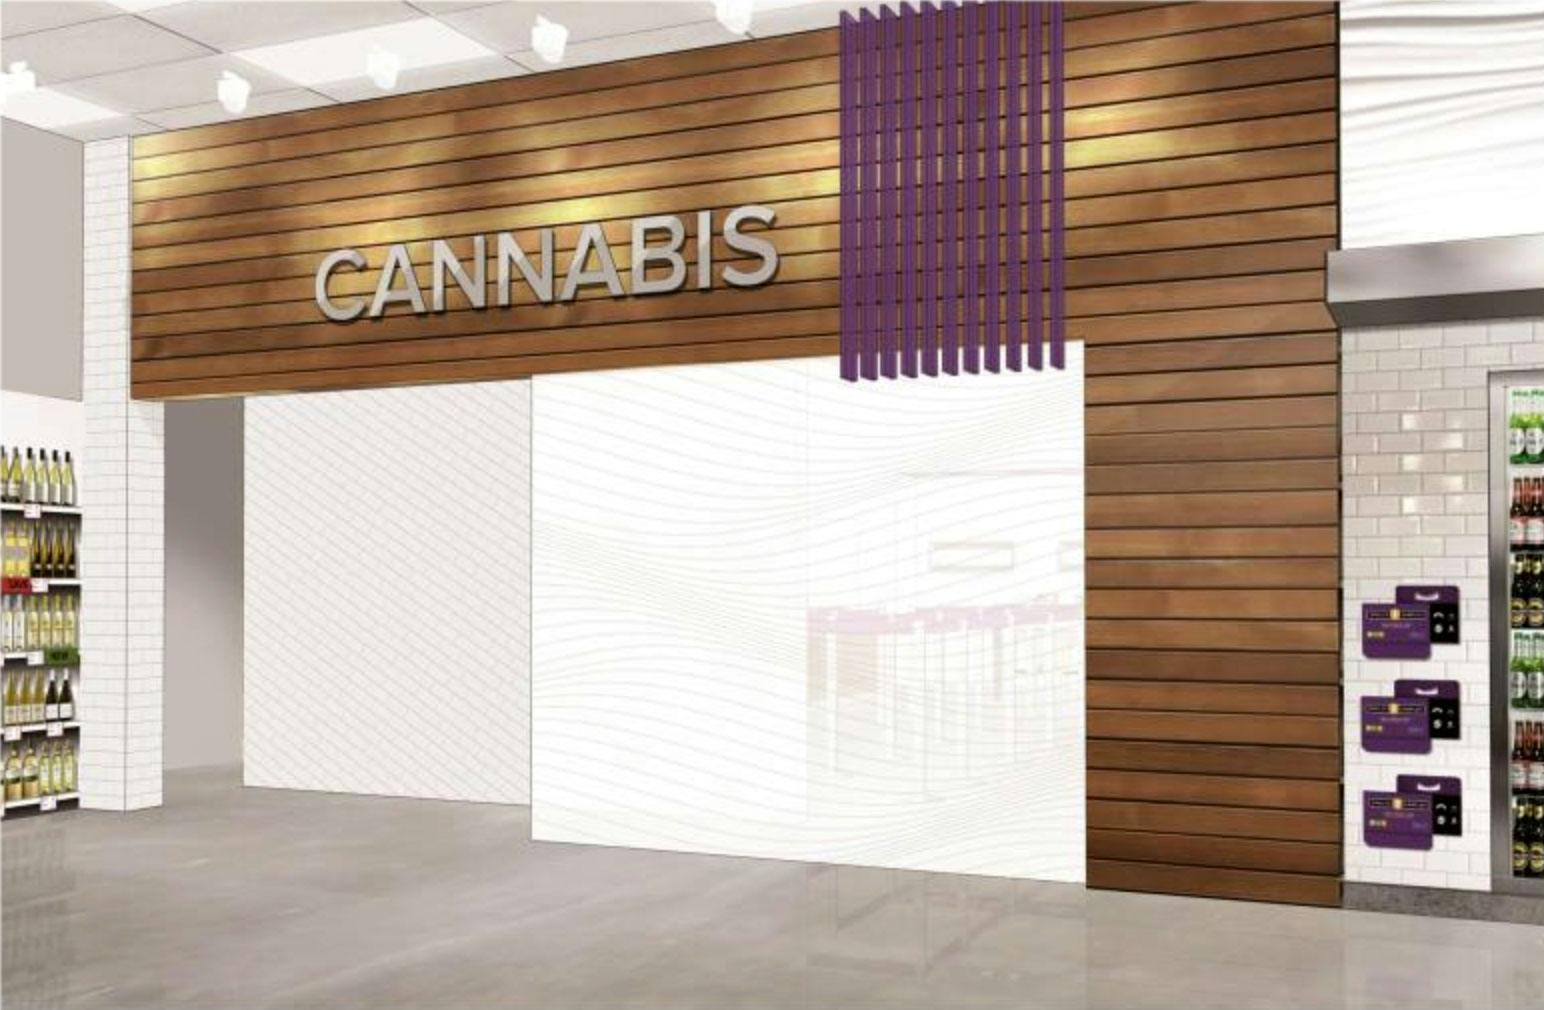 Nova Scotia Unveils The Worlds First Liquor and Cannabis Retail Store1 Maine Pageant Winner Stripped of Title Due to Cannabis Use